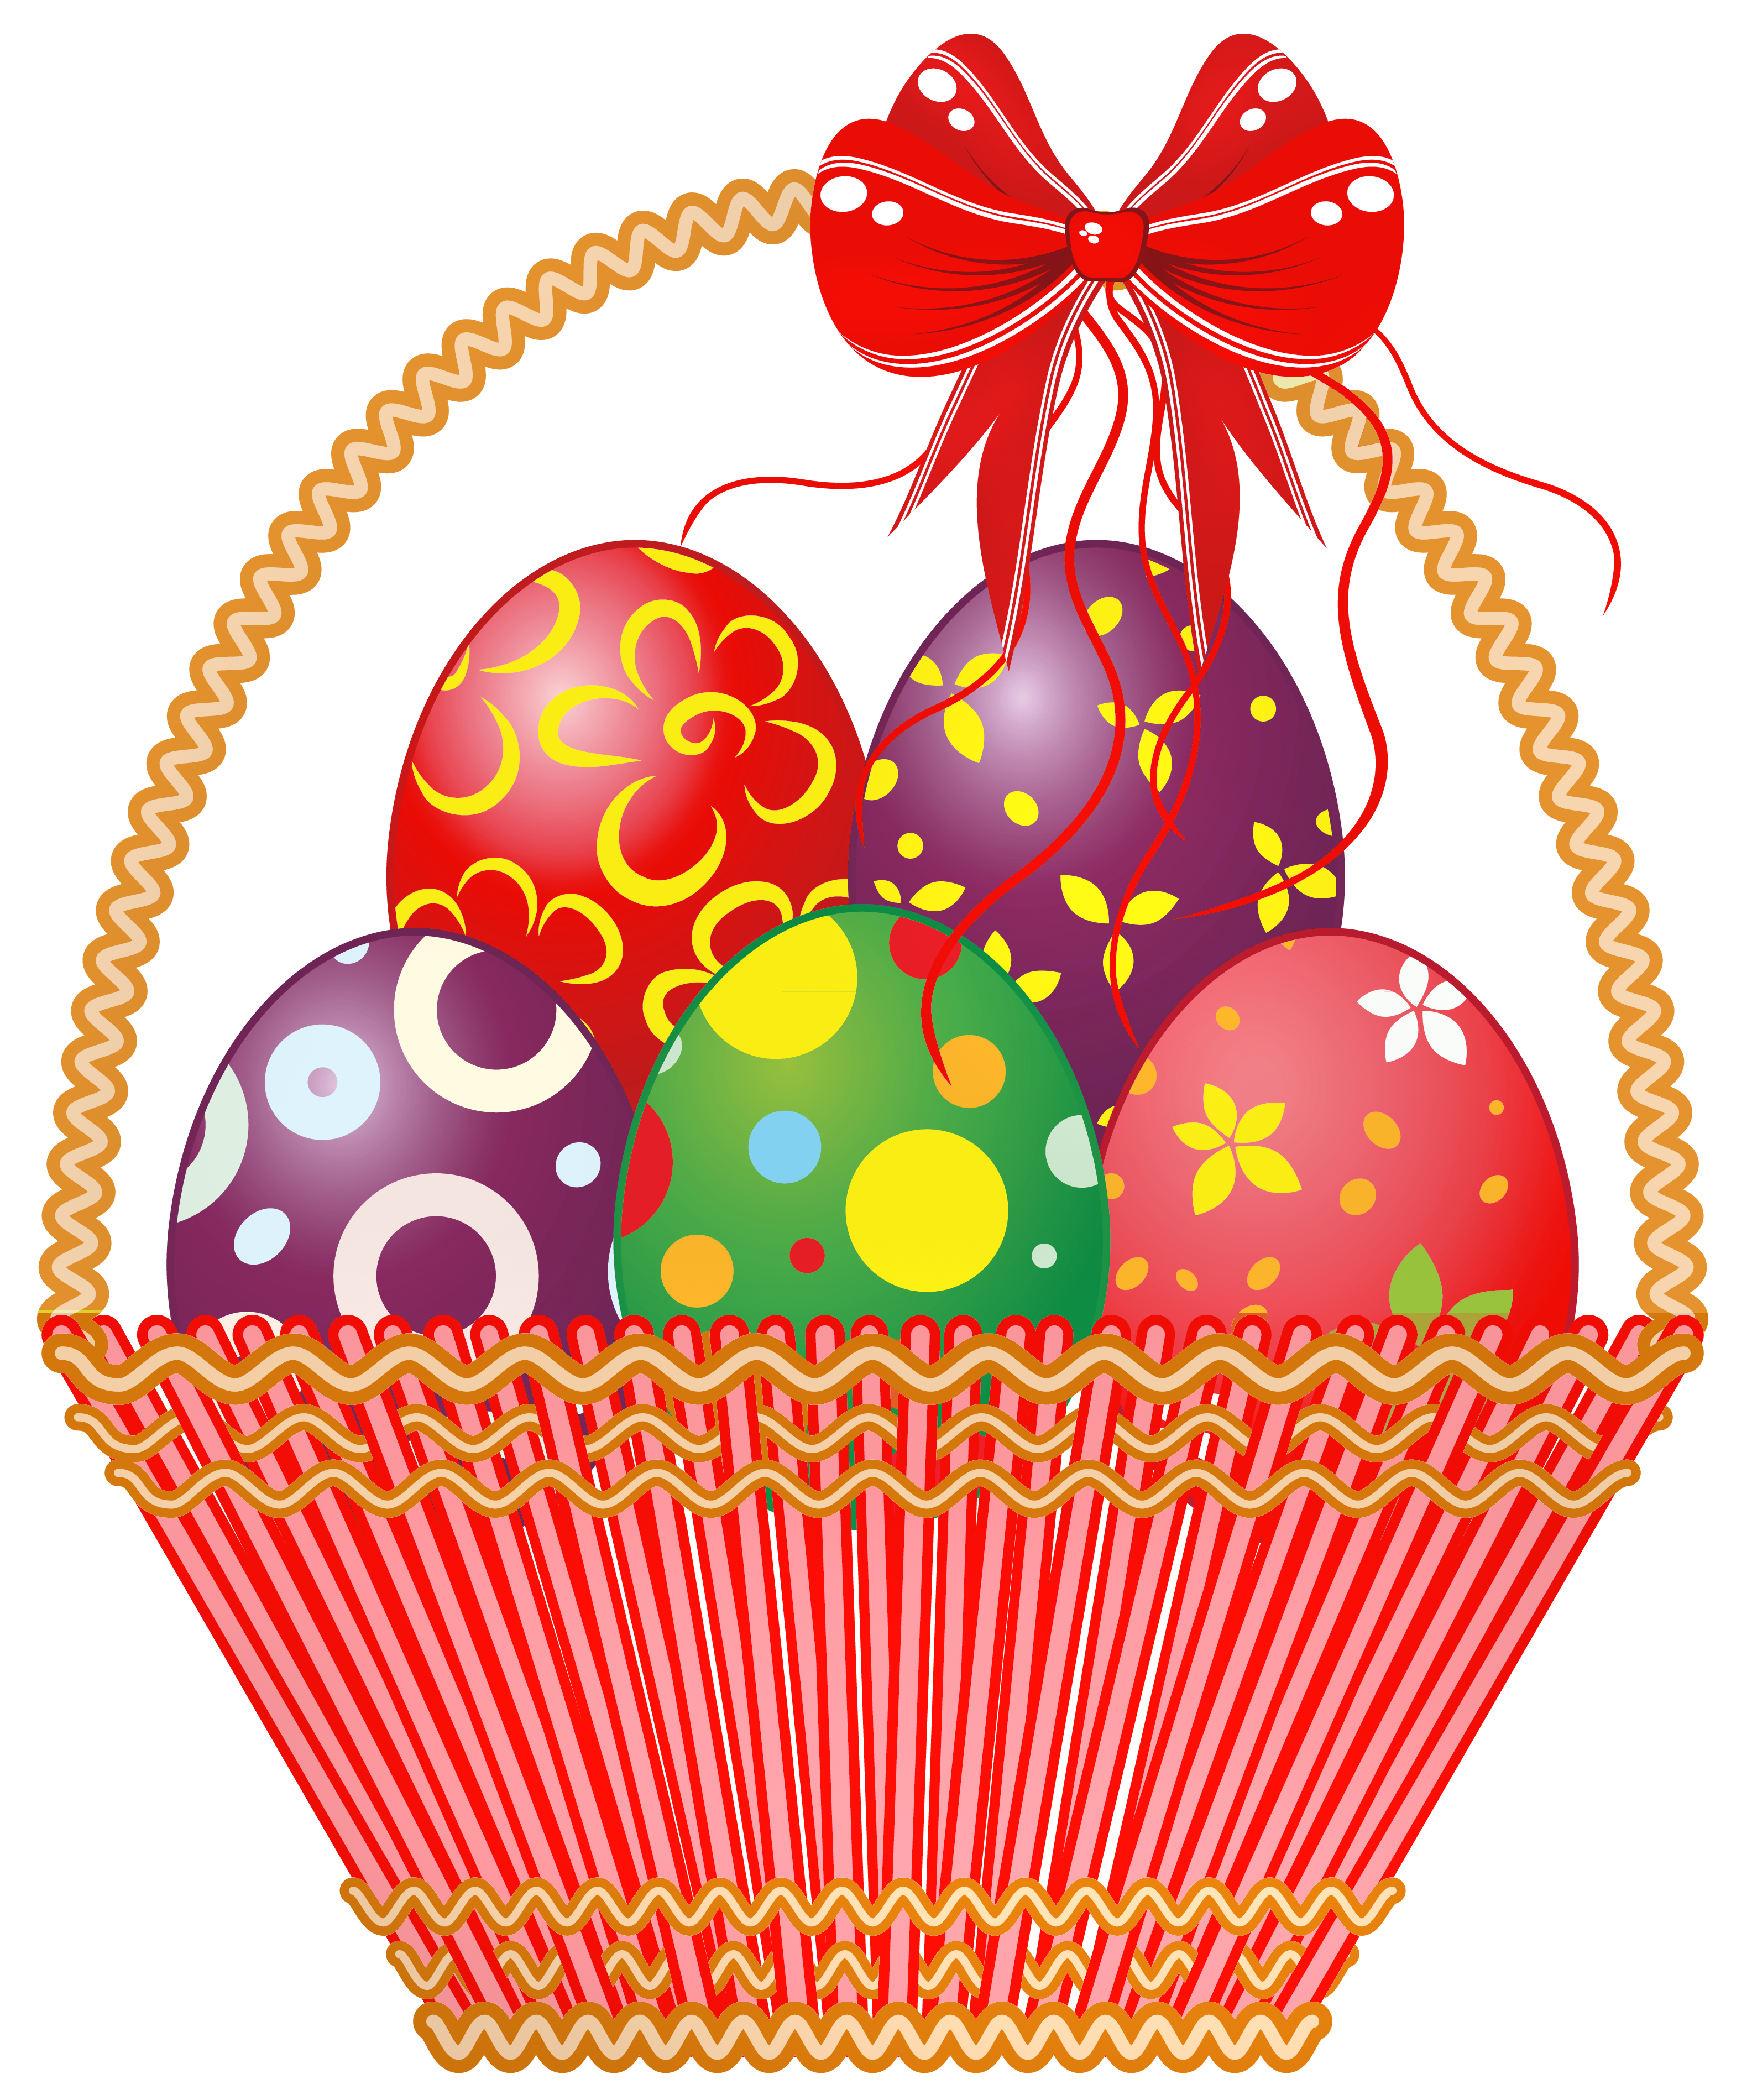 Easter Red Basket with Eggs PNG Clipart Picture